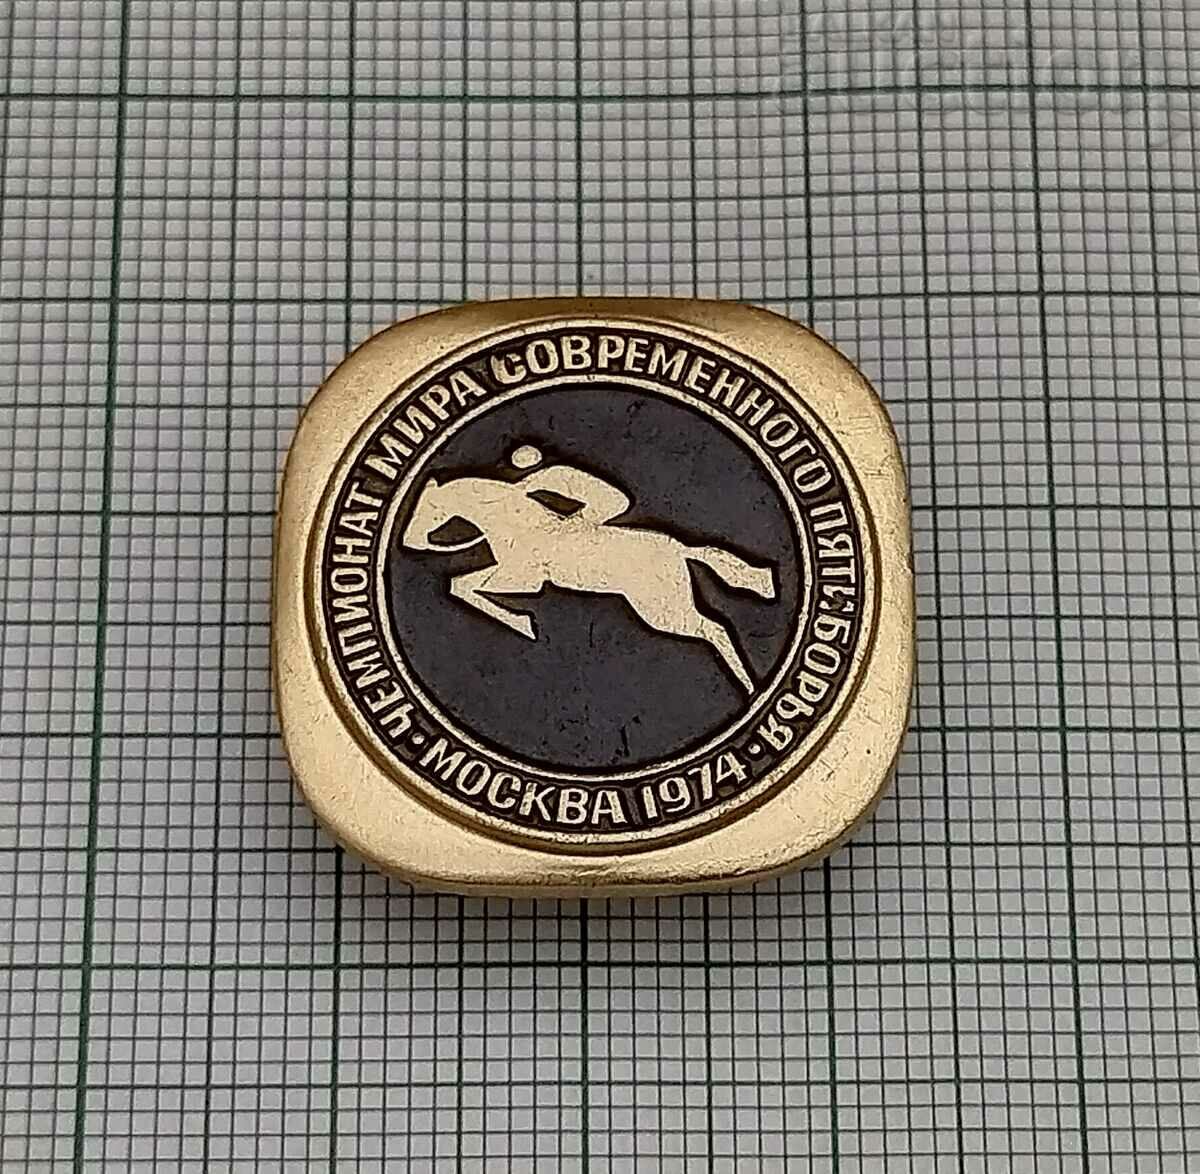 MODERN PENTHOUSE EQUESTRIAN SPORTS SAINT CHAMPIONSHIP MOSCOW-74. BADGE